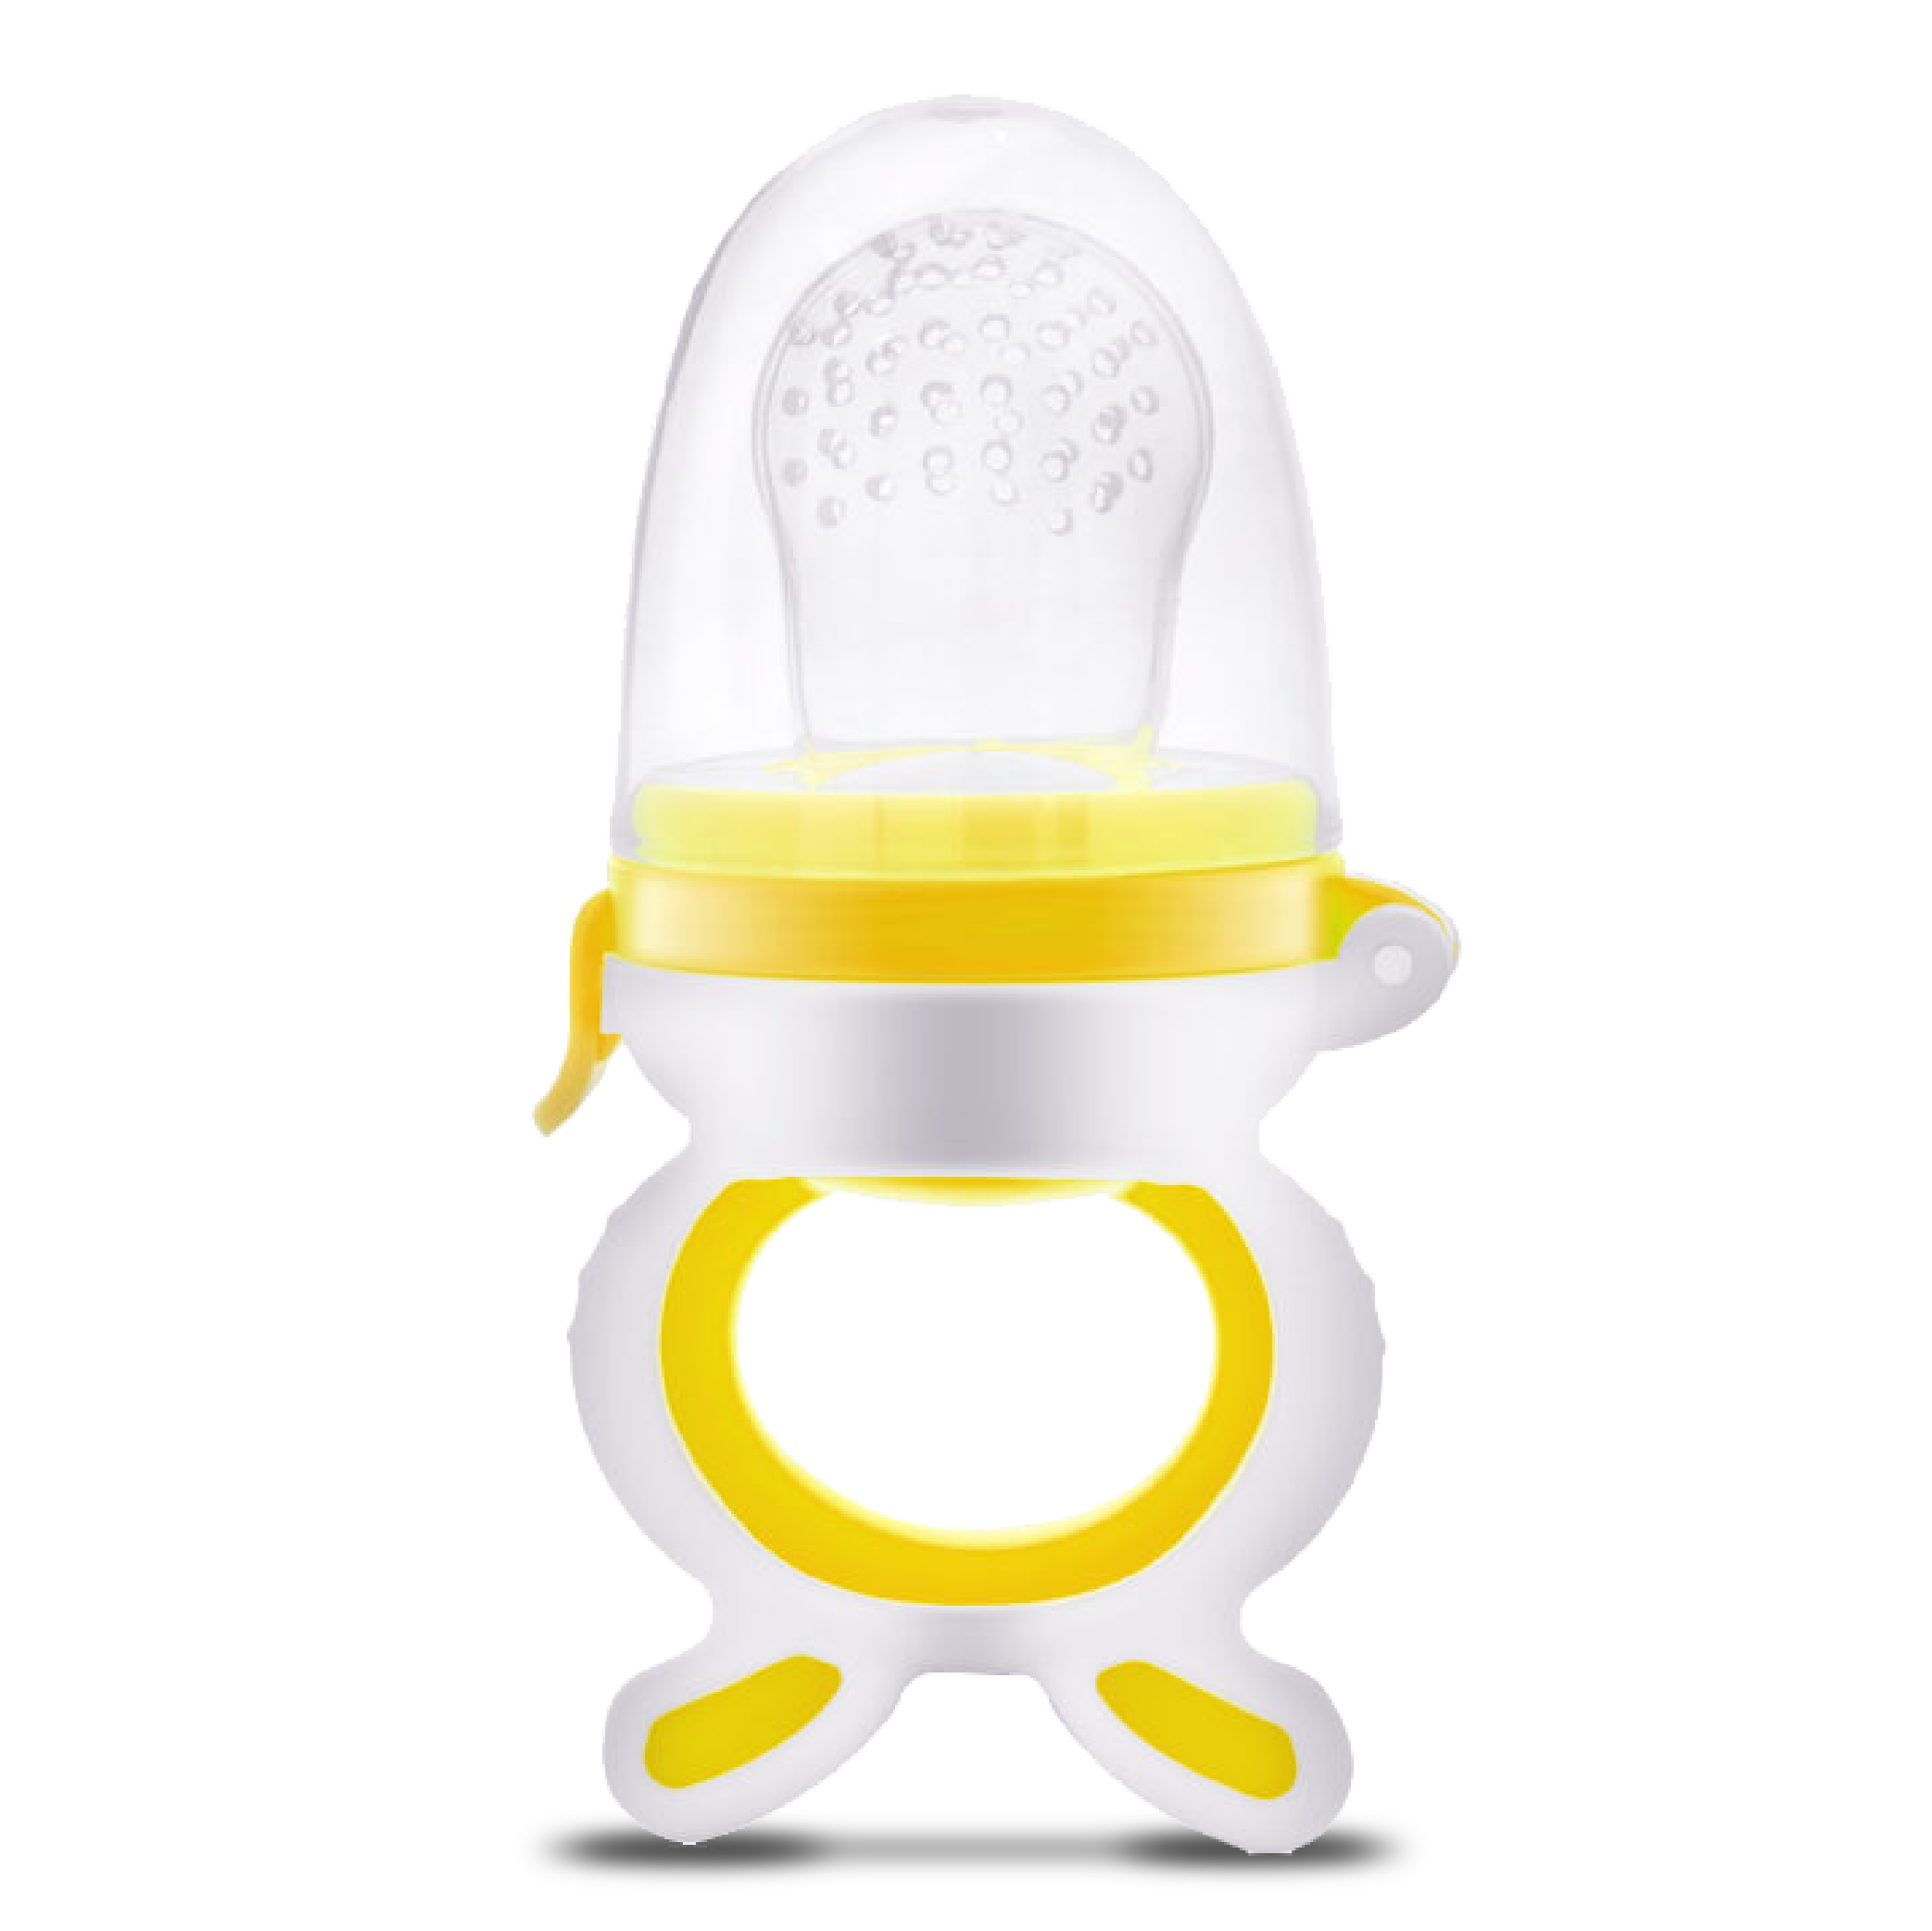 Bubbles fruit teether for baby - yellow